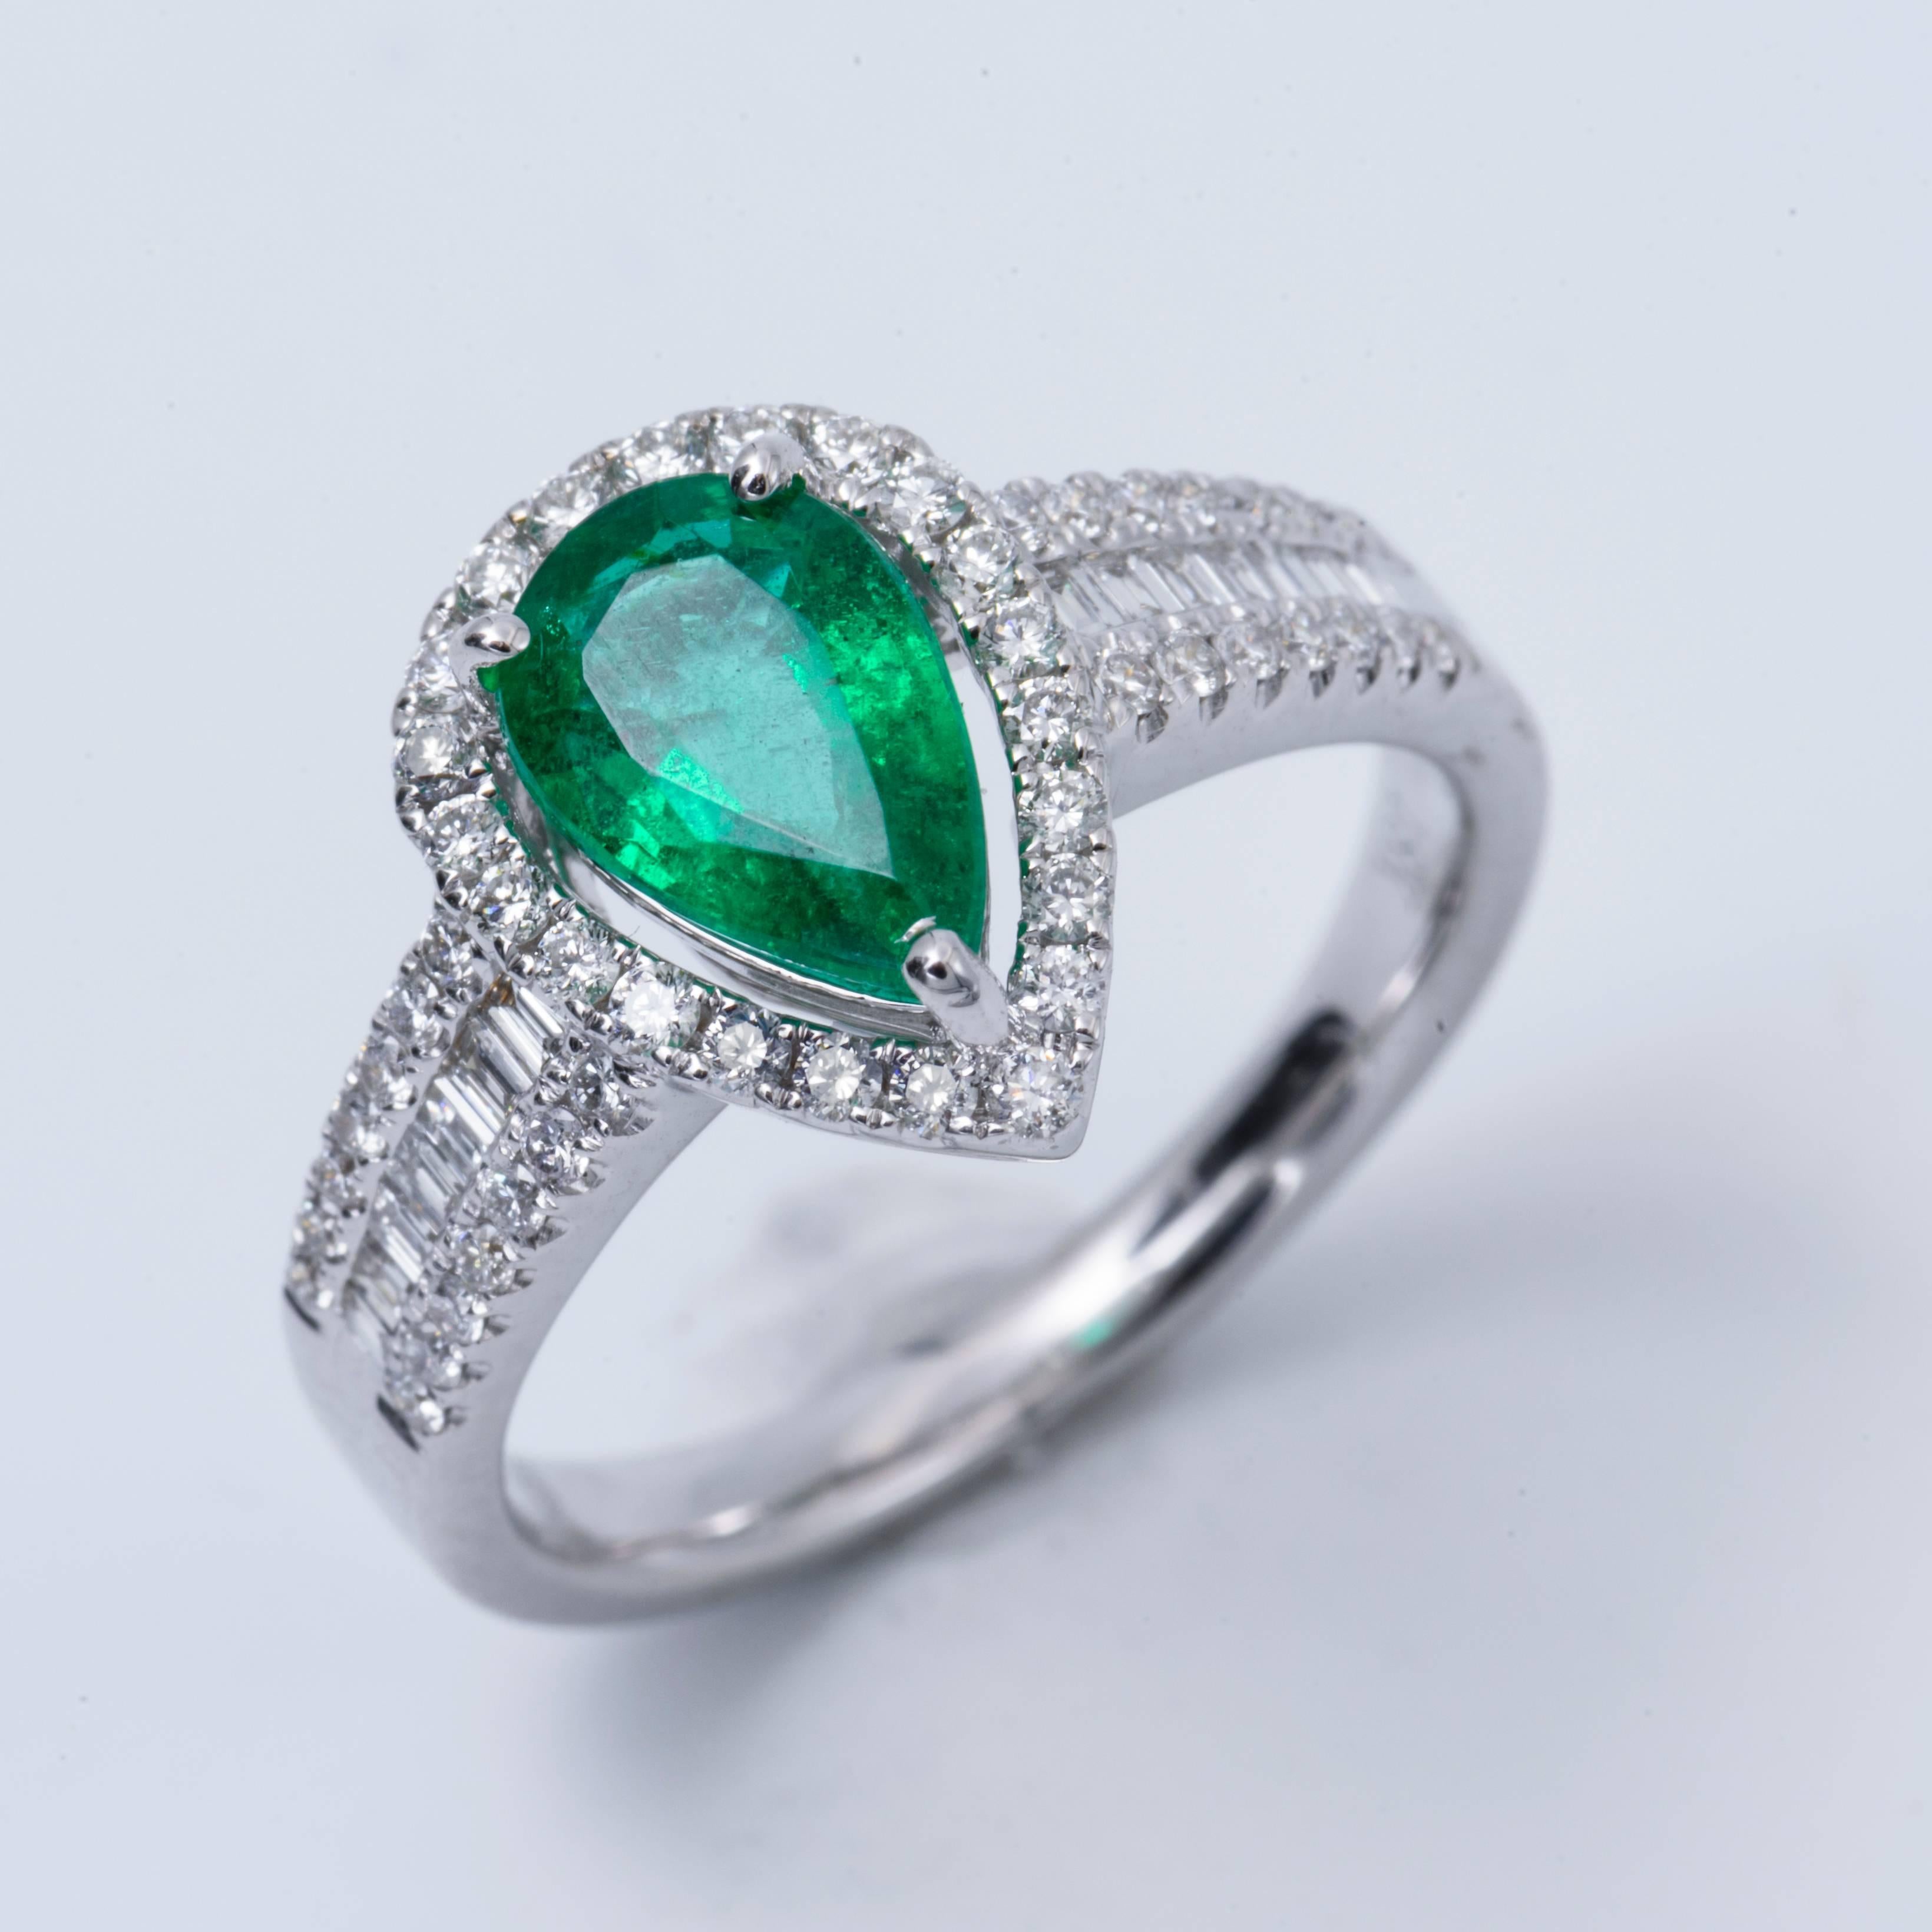 Style: 18k White Pear Shape Emerald Diamond Halo Engagement Ring
Material: 18k White Gold
Gemstone Details: 1 Pear Shape Emerald approximately 1.26ct. 8x6 mm
Diamond Details: Approximately  0.53ctw of diamonds. Diamonds are H-I in color and SI in